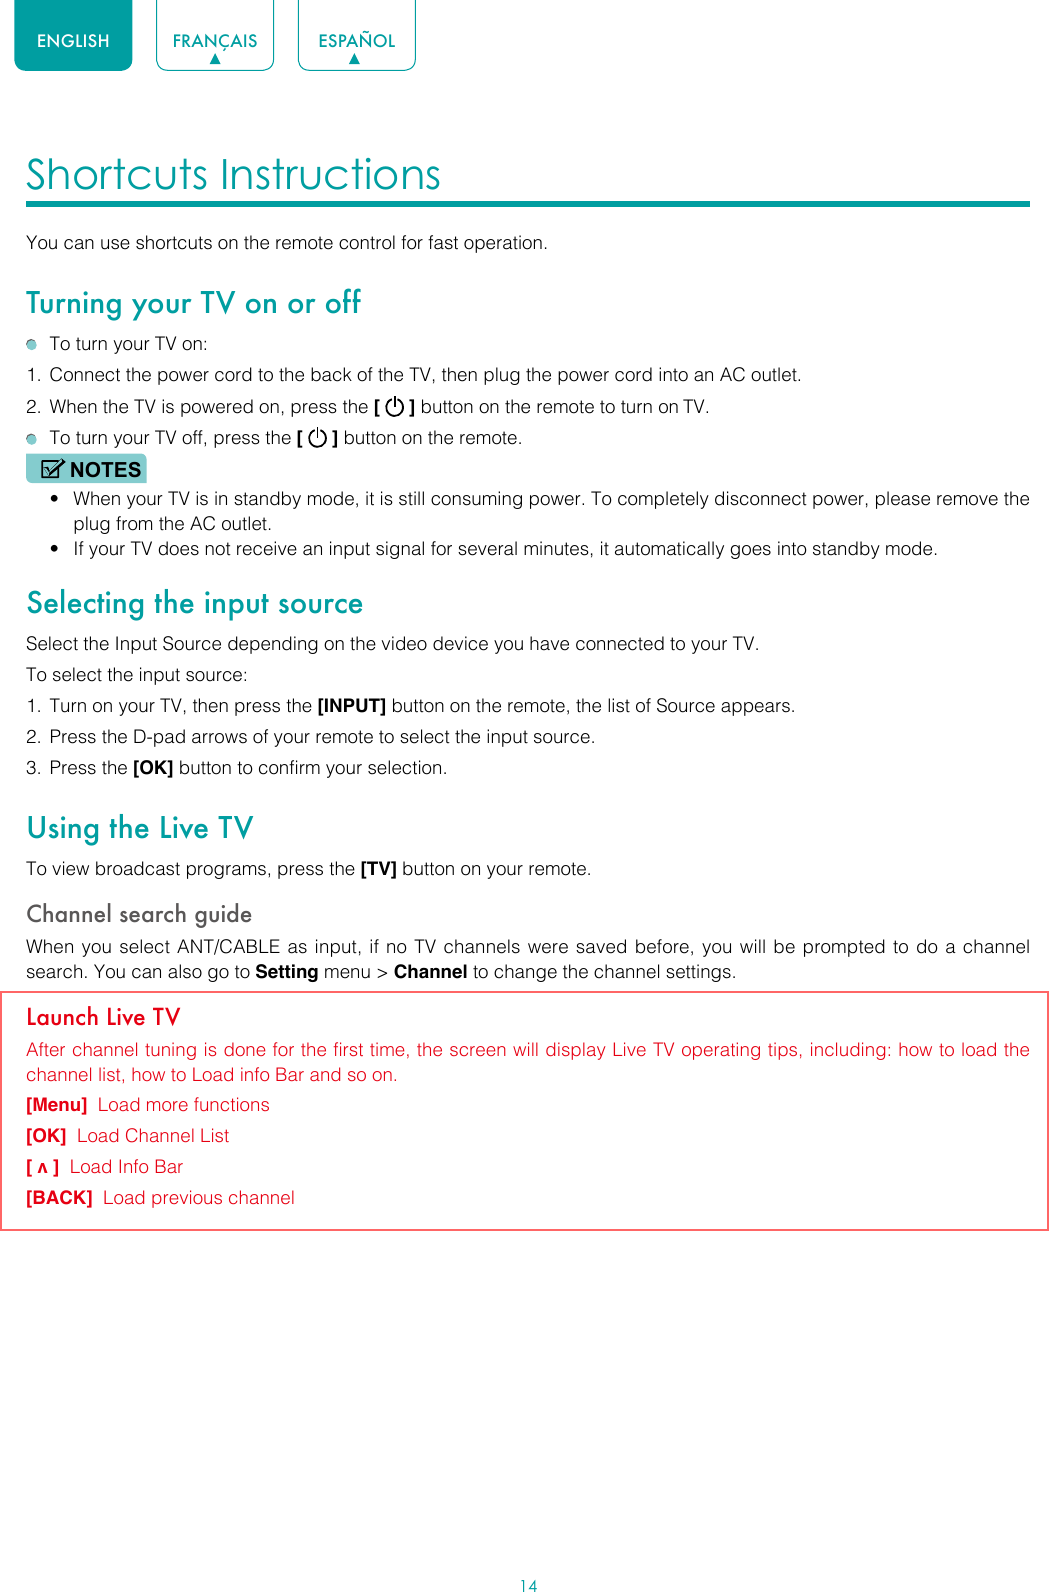 14ENGLISH FRANÇAIS ESPAÑOLShortcuts Instructions You can use shortcuts on the remote control for fast operation. Turning your TV on or off  To turn your TV on:1.  Connect the power cord to the back of the TV, then plug the power cord into an AC outlet.2.  When the TV is powered on, press the [   ] button on the remote to turn on TV.  To turn your TV off, press the [   ] button on the remote.NOTES• When your TV is in standby mode, it is still consuming power. To completely disconnect power, please remove the  plug from the AC outlet.• If your TV does not receive an input signal for several minutes, it automatically goes into standby mode.Selecting the input sourceSelect the Input Source depending on the video device you have connected to your TV.To select the input source:1.  Turn on your TV, then press the [INPUT] button on the remote, the list of Source appears.2.  Press the D-pad arrows of your remote to select the input source. 3.  Press the [OK] button to confirm your selection.Using the Live TVTo view broadcast programs, press the [TV] button on your remote.Channel search guideWhen you select ANT/CABLE as input, if no TV channels were saved before, you will be prompted to do a channel search. You can also go to Setting menu &gt; Channel to change the channel settings.Launch Live TVAfter channel tuning is done for the first time, the screen will display Live TV operating tips, including: how to load the channel list, how to Load info Bar and so on. [Menu]  Load more functions[OK]  Load Channel List[ v ]  Load Info Bar[BACK]  Load previous channel